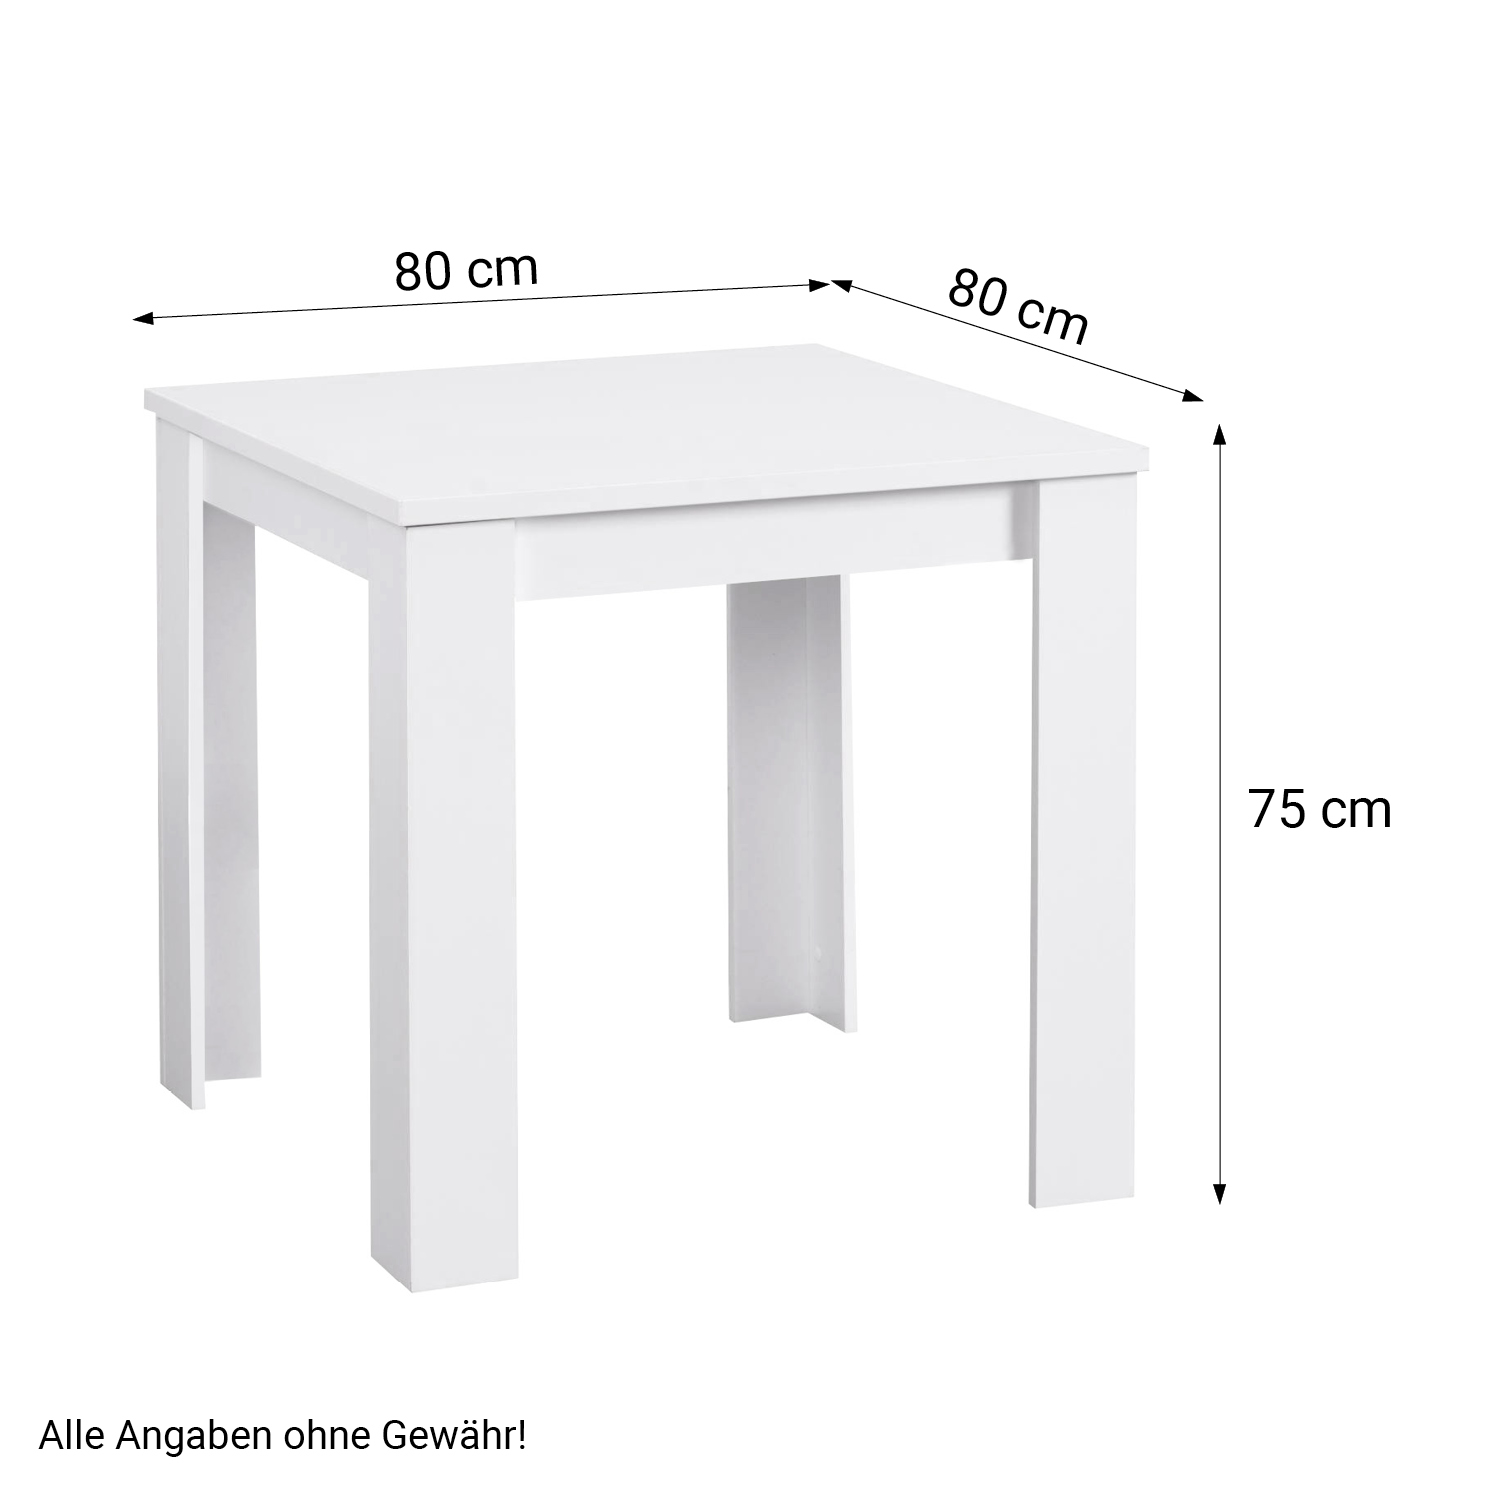 Modern Dining Table White 80x80 cm with 2 Chairs Grey Velvet Dining Room Table Wooden Table